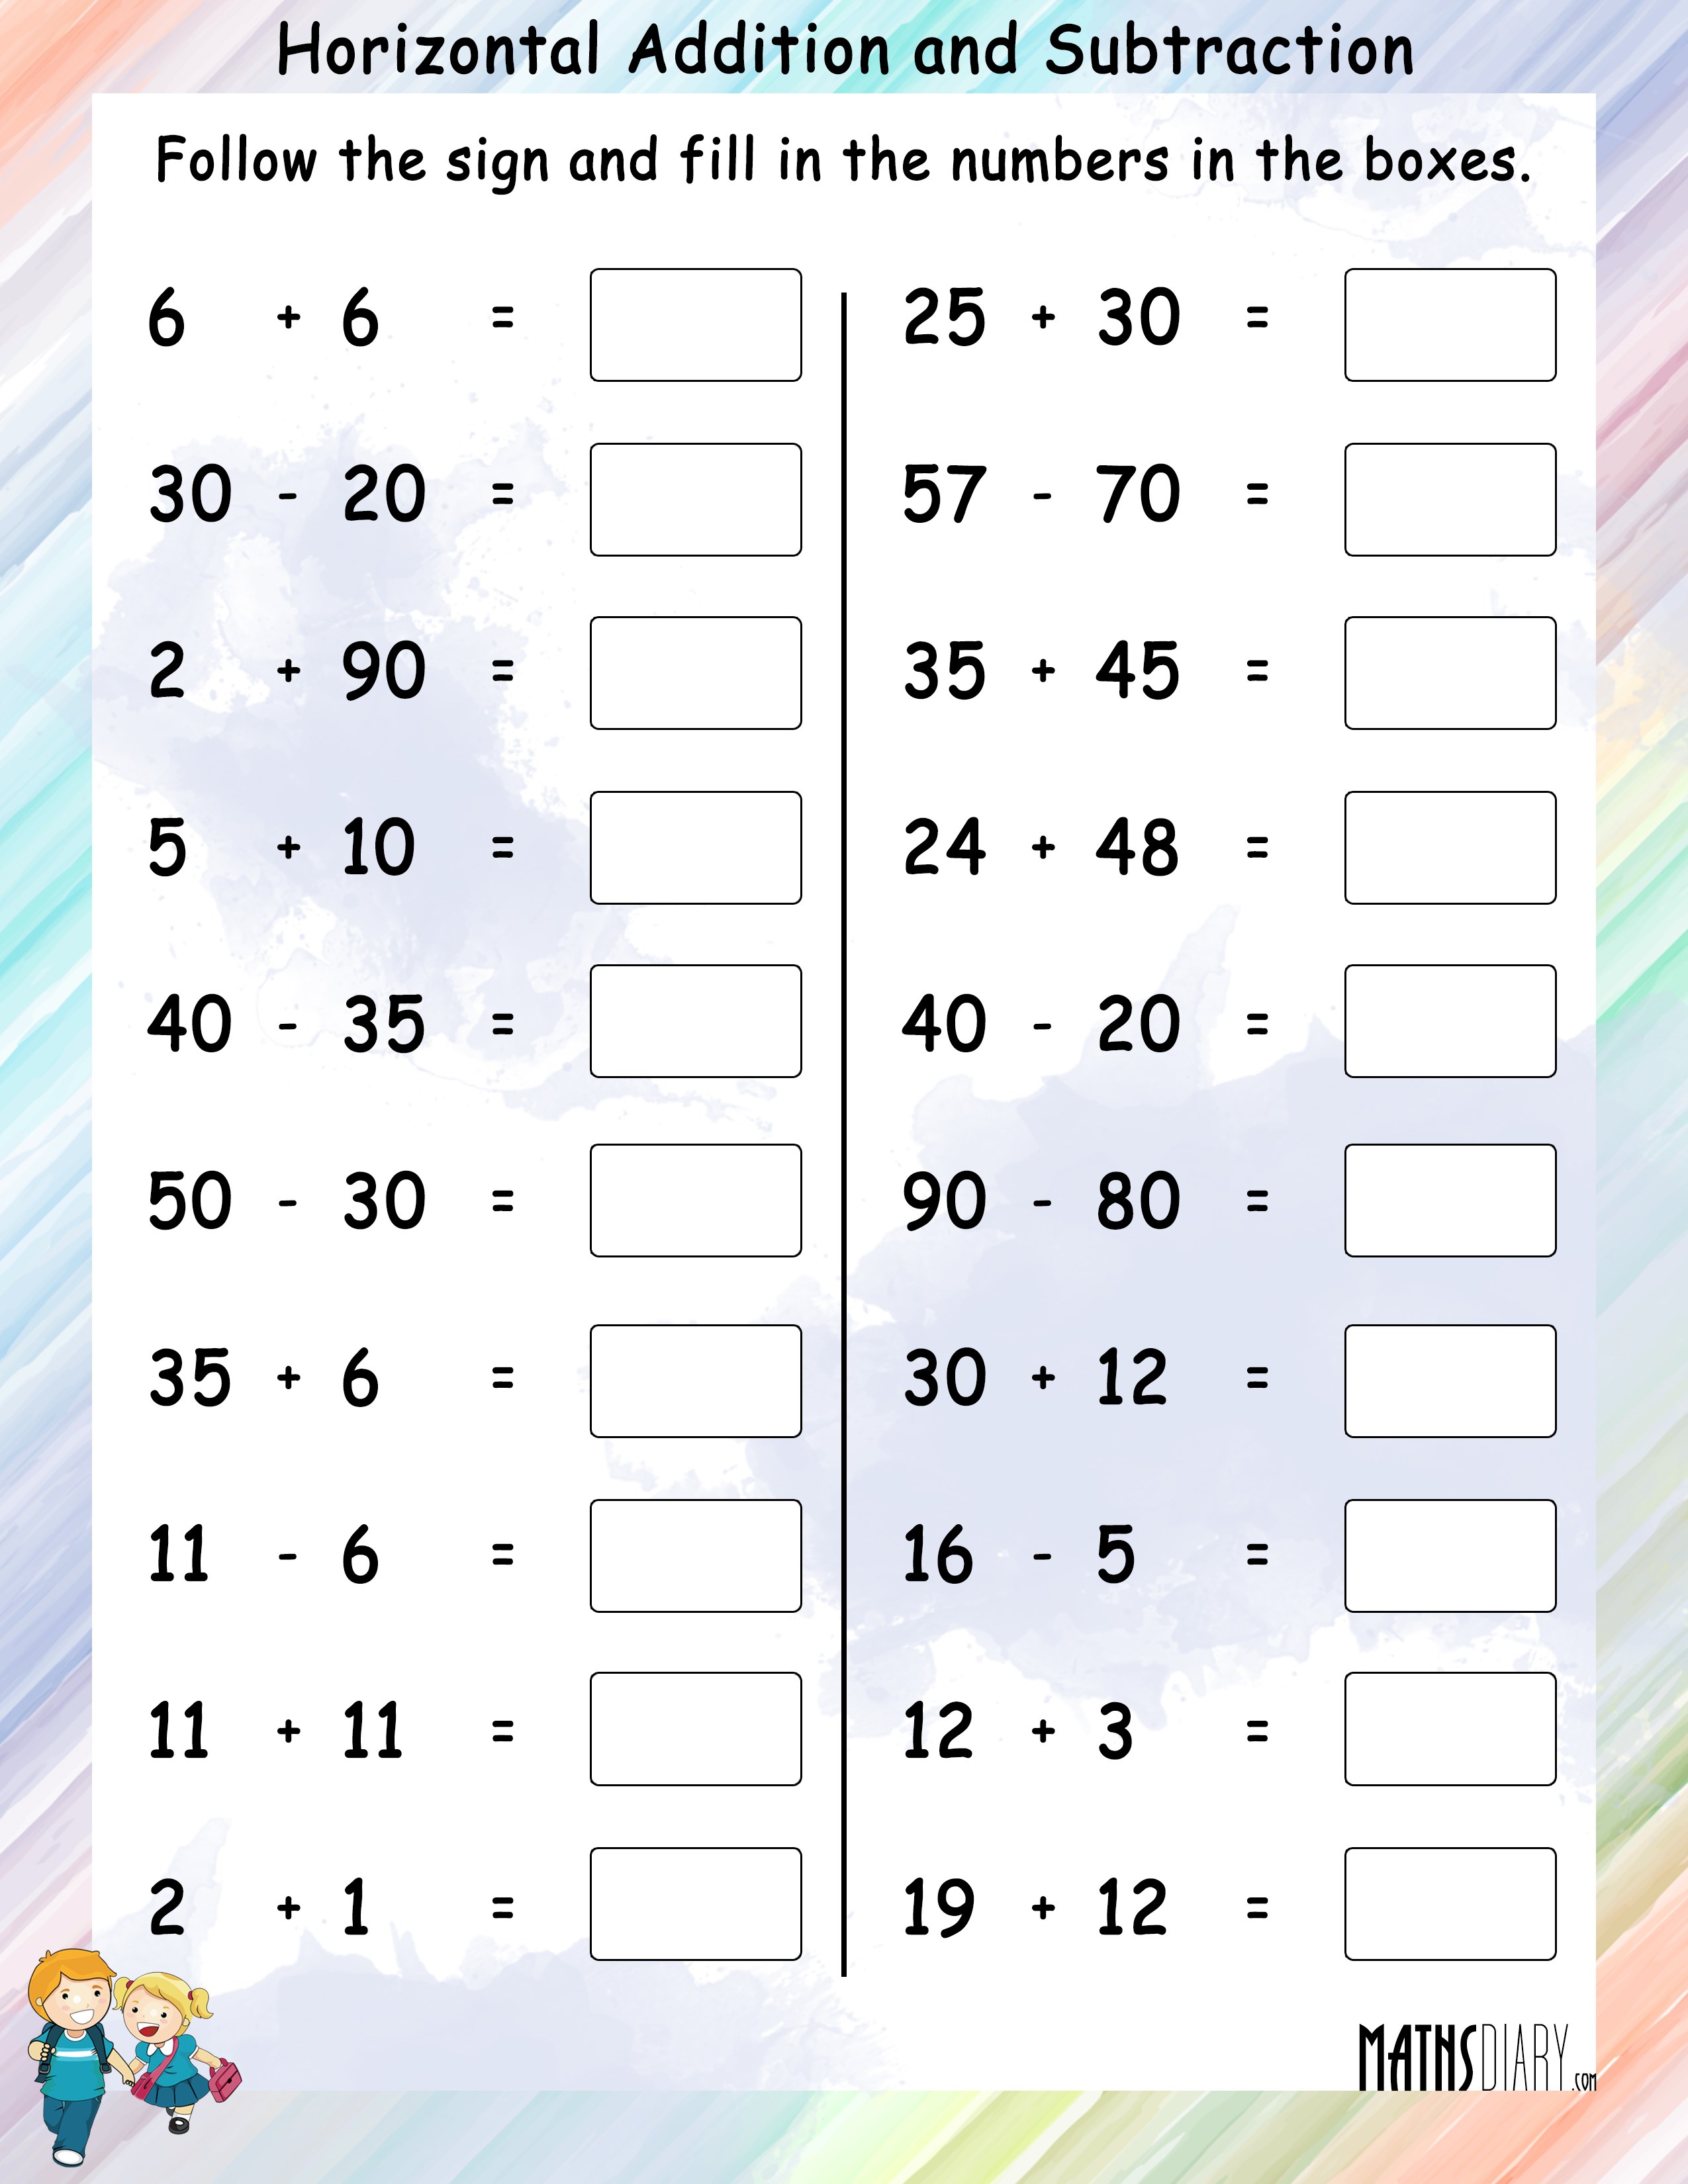 Horizontal Addition and Subtraction - Math Worksheets - MathsDiary.com